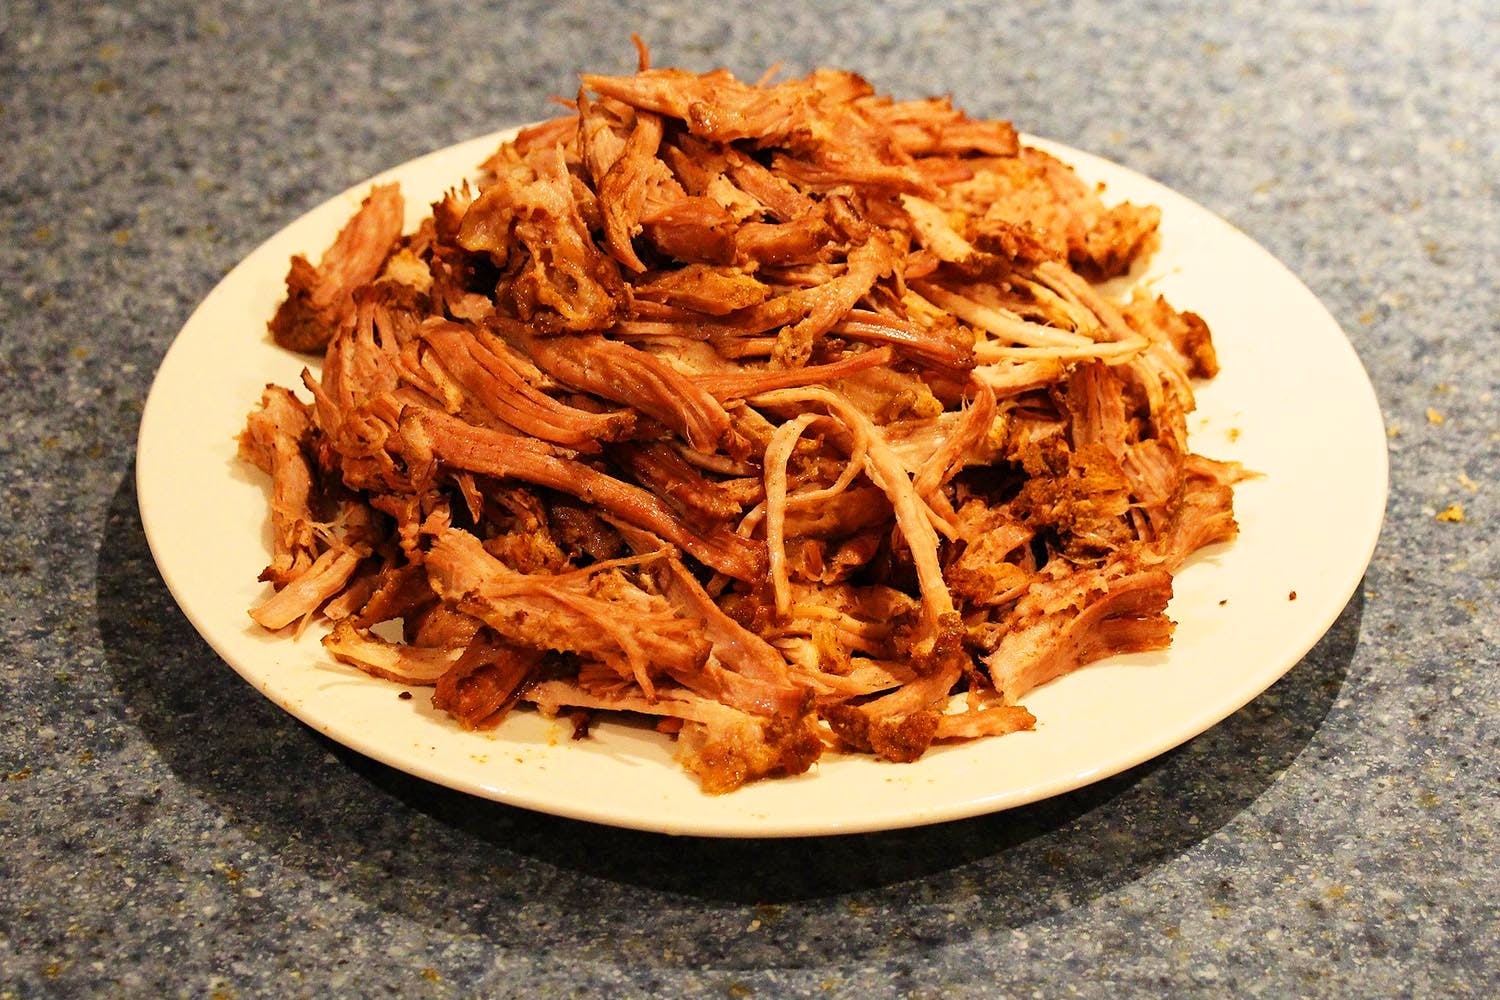 Cuisine,Food,Dish,Chilorio,Pulled pork,Ingredient,Side dish,Barbacoa,Meat,Dried shredded squid